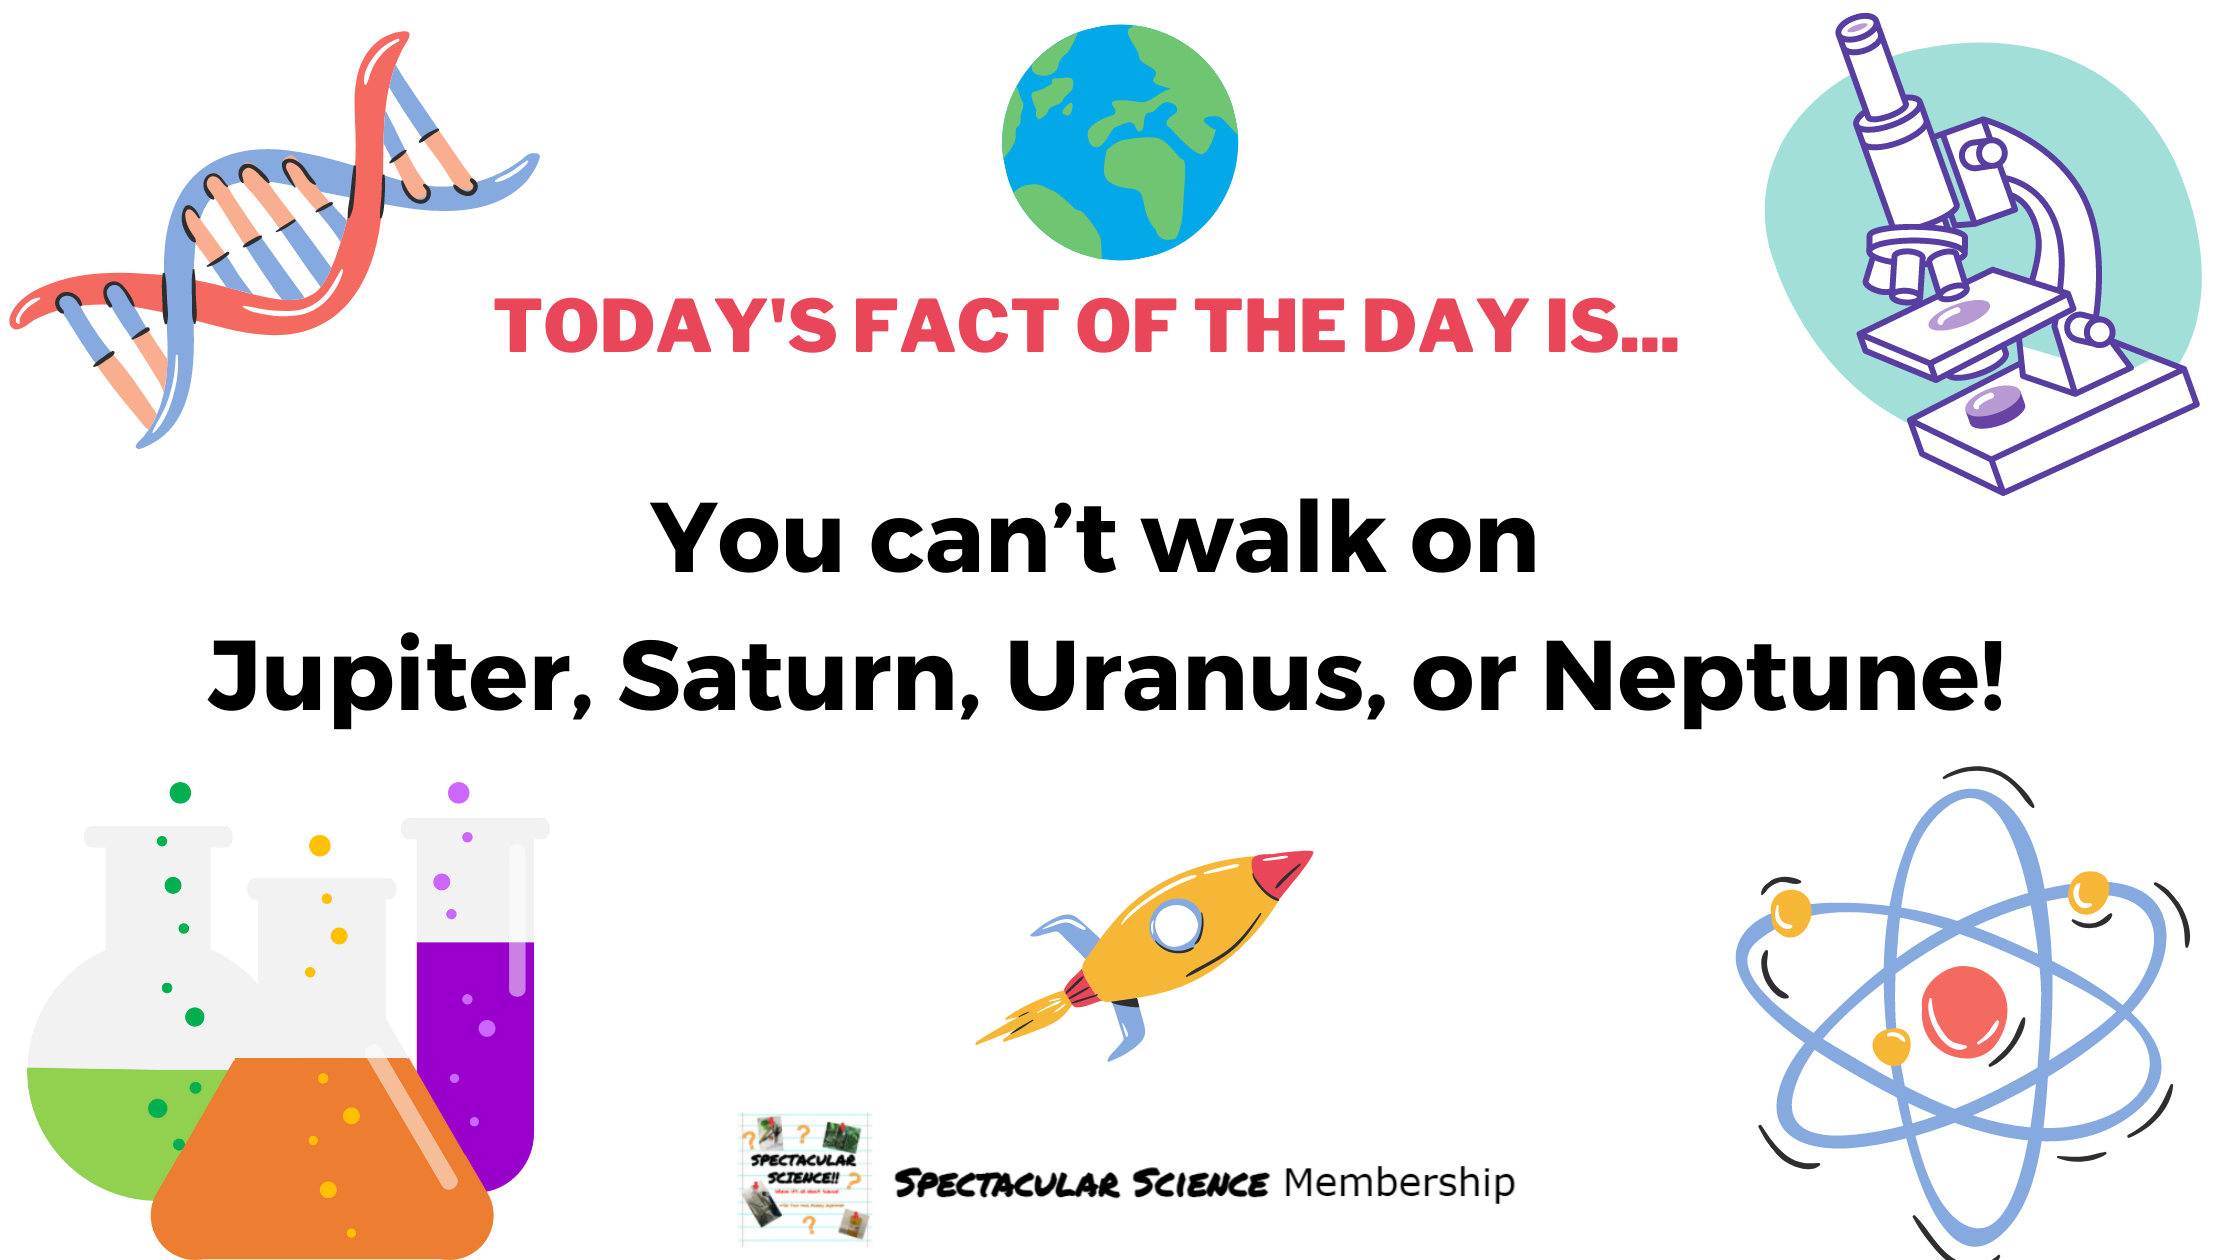 Fact of the Day Image Nov. 19th